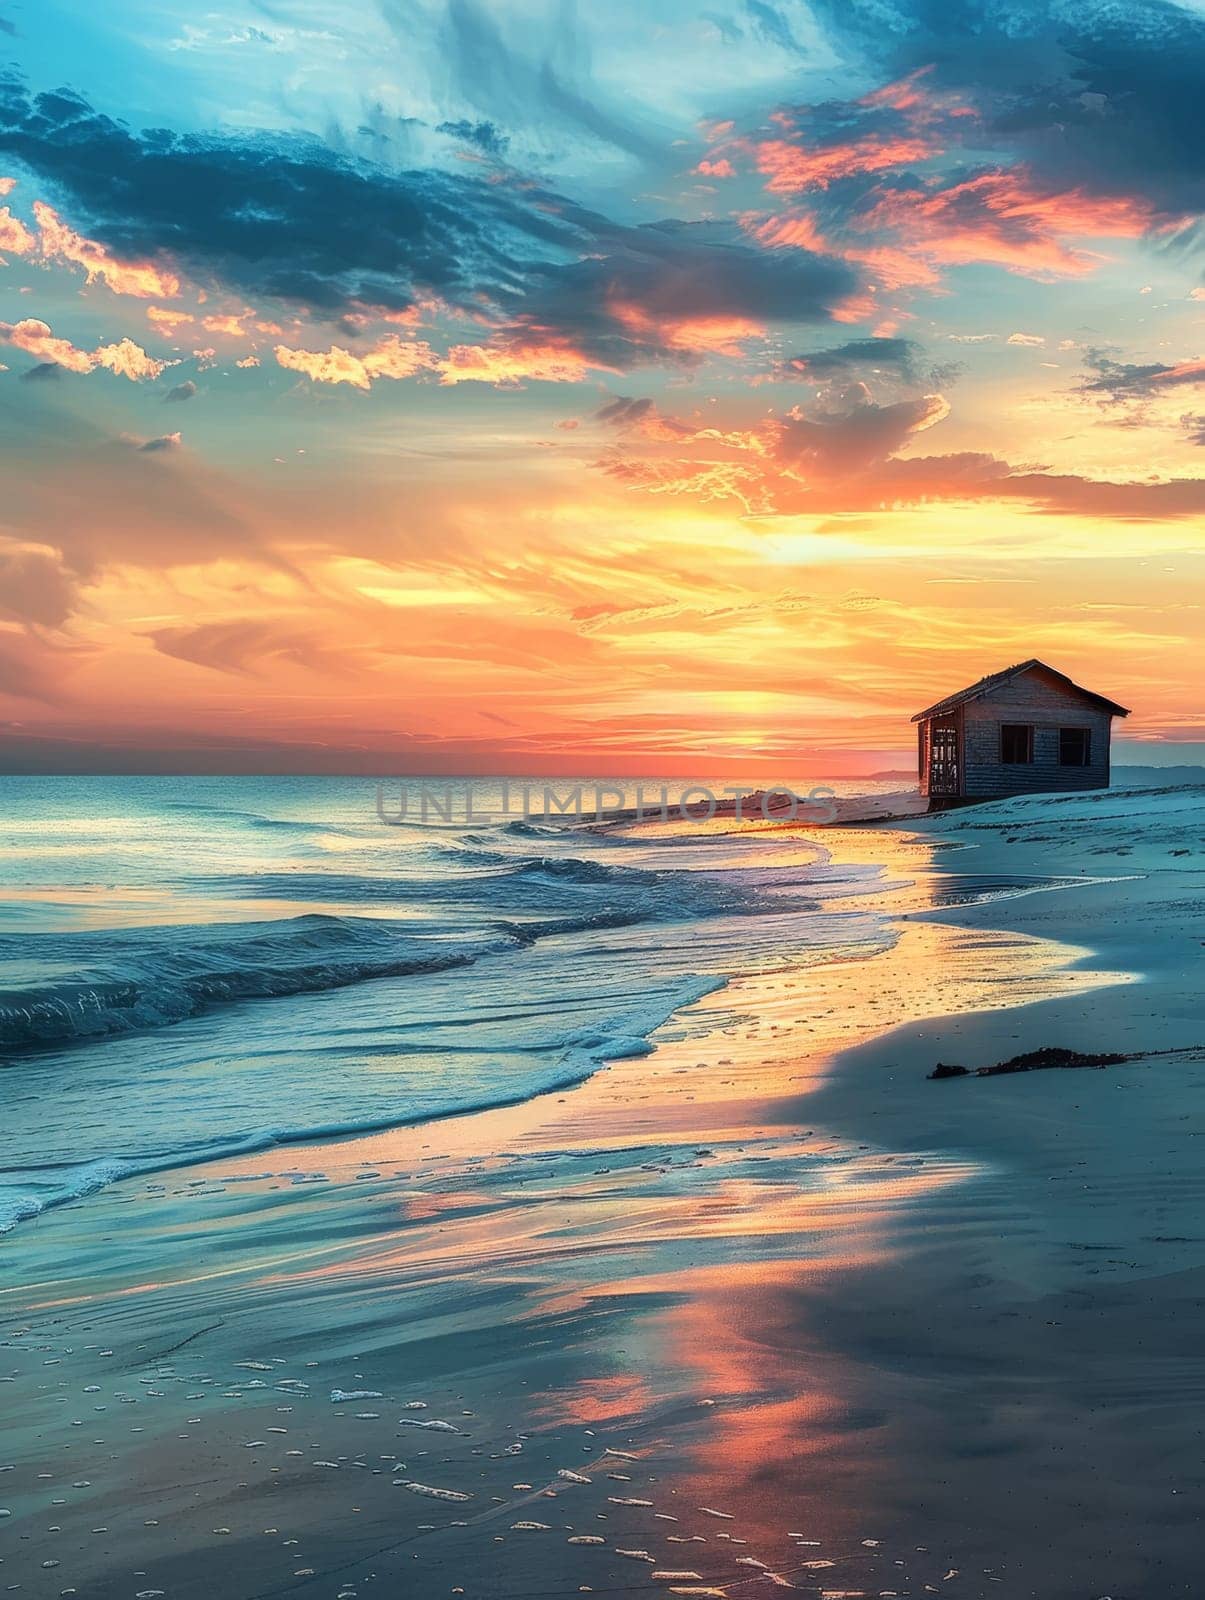 A serene beach at sunset, featuring a lifeguard hut, calm waves, and a sky painted with hues of orange and blue. by sfinks